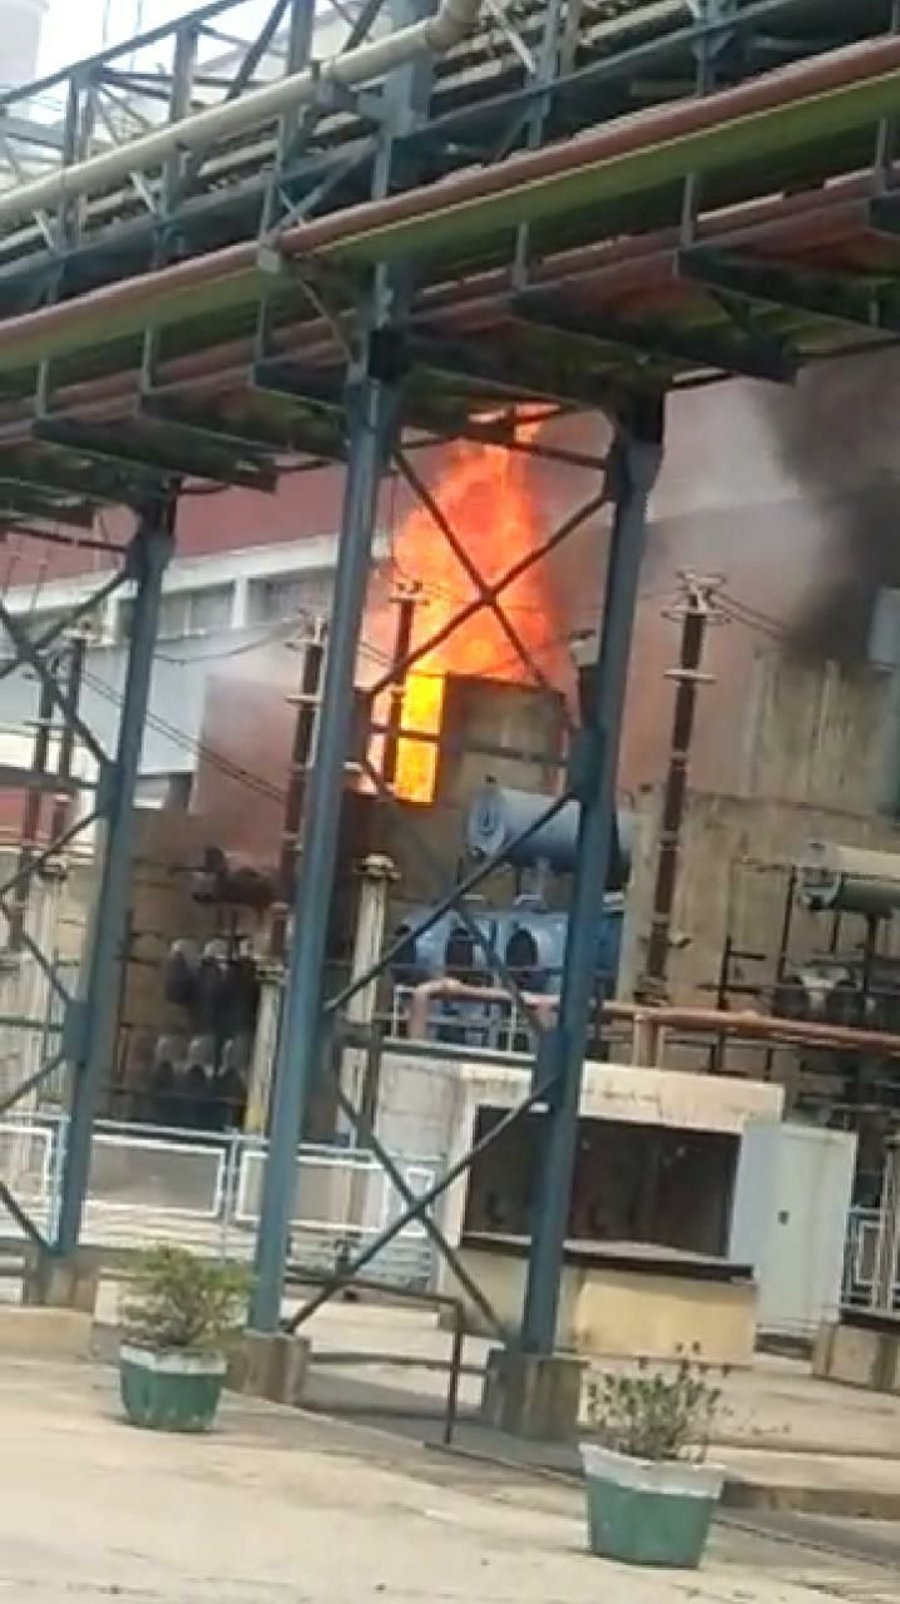 Eight units of affected NTPC in Singrauli fire incident